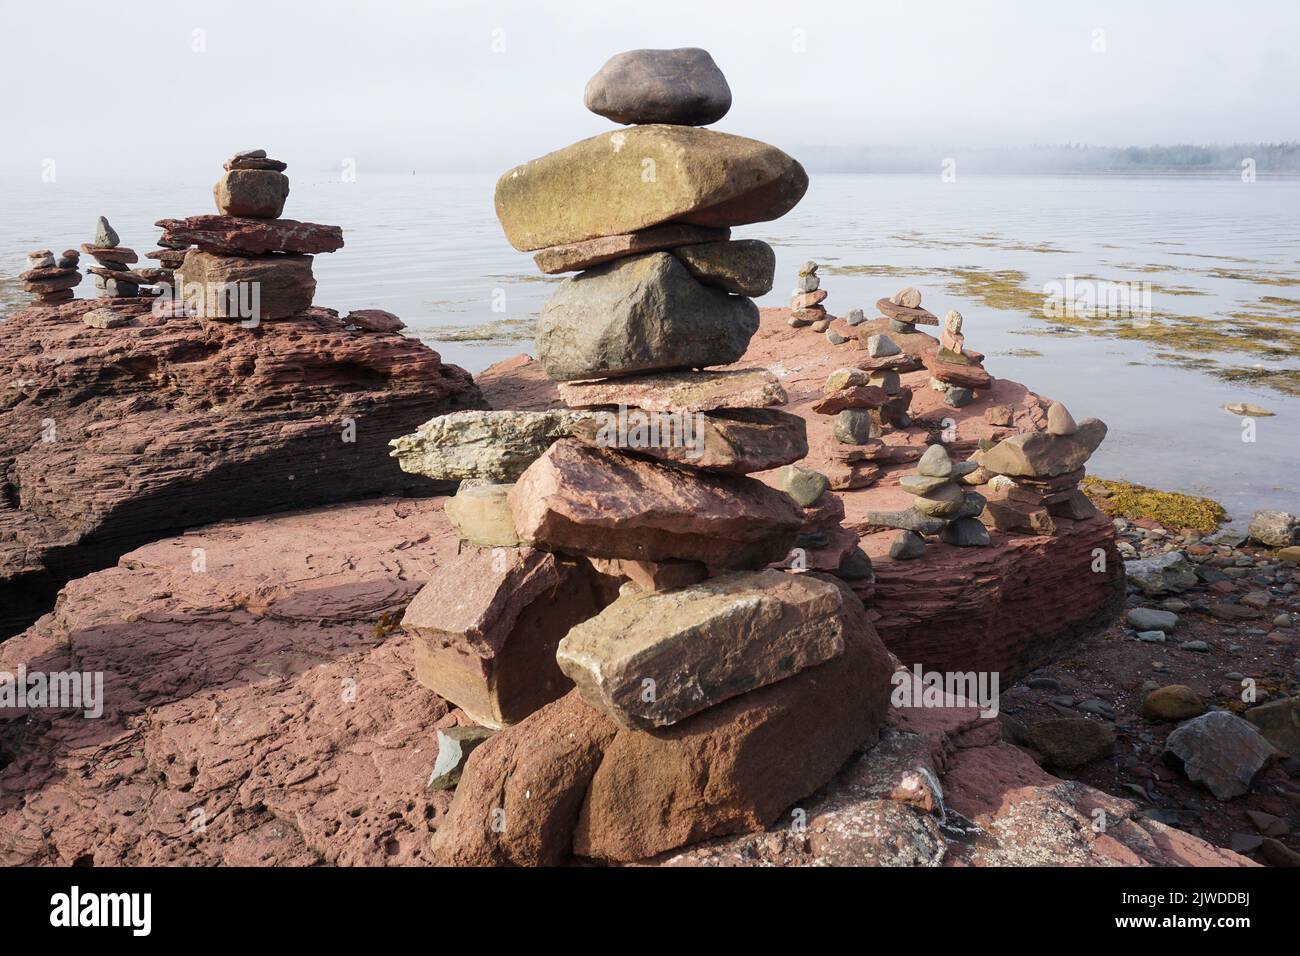 Inuksuk (Inukshuk) stone sculptures on a rock in the Bay of Fundy Stock Photo